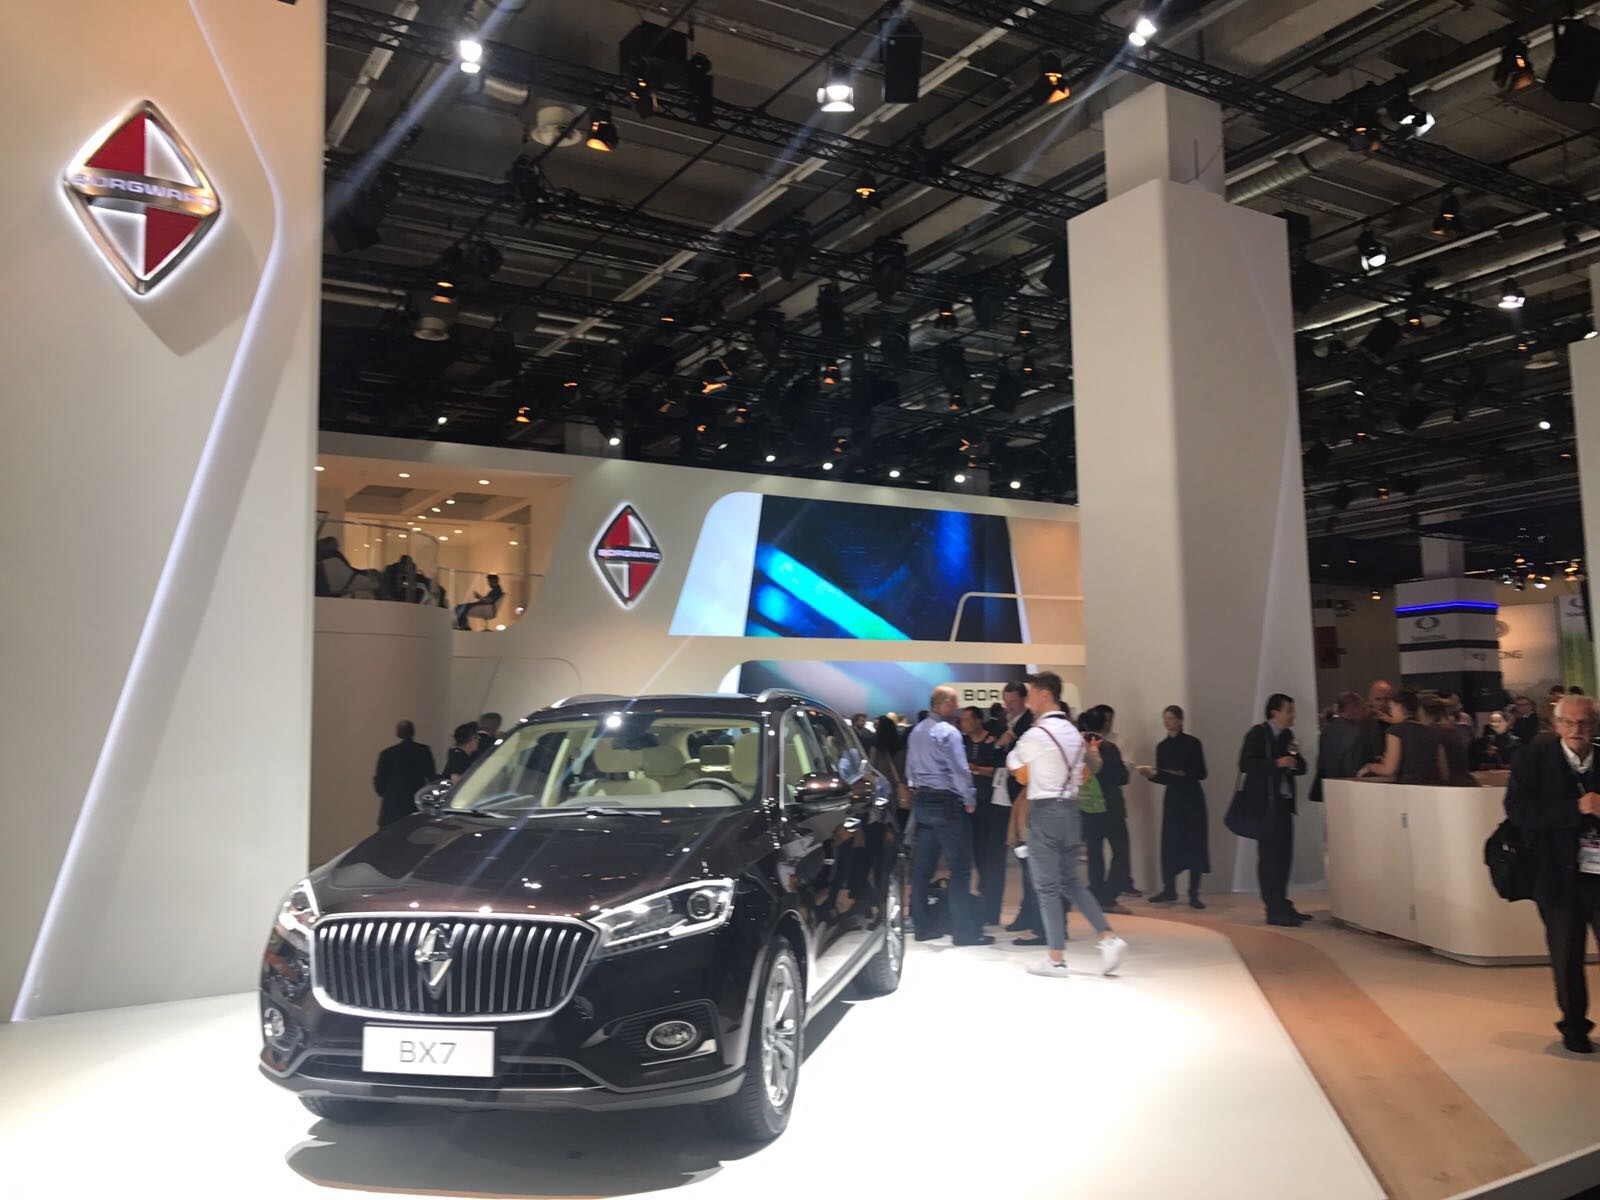 Borgward showed off the limited-edition BX7 SUV. The new luxury SUV will go on sale in Germany first before other models are launched across the continent.